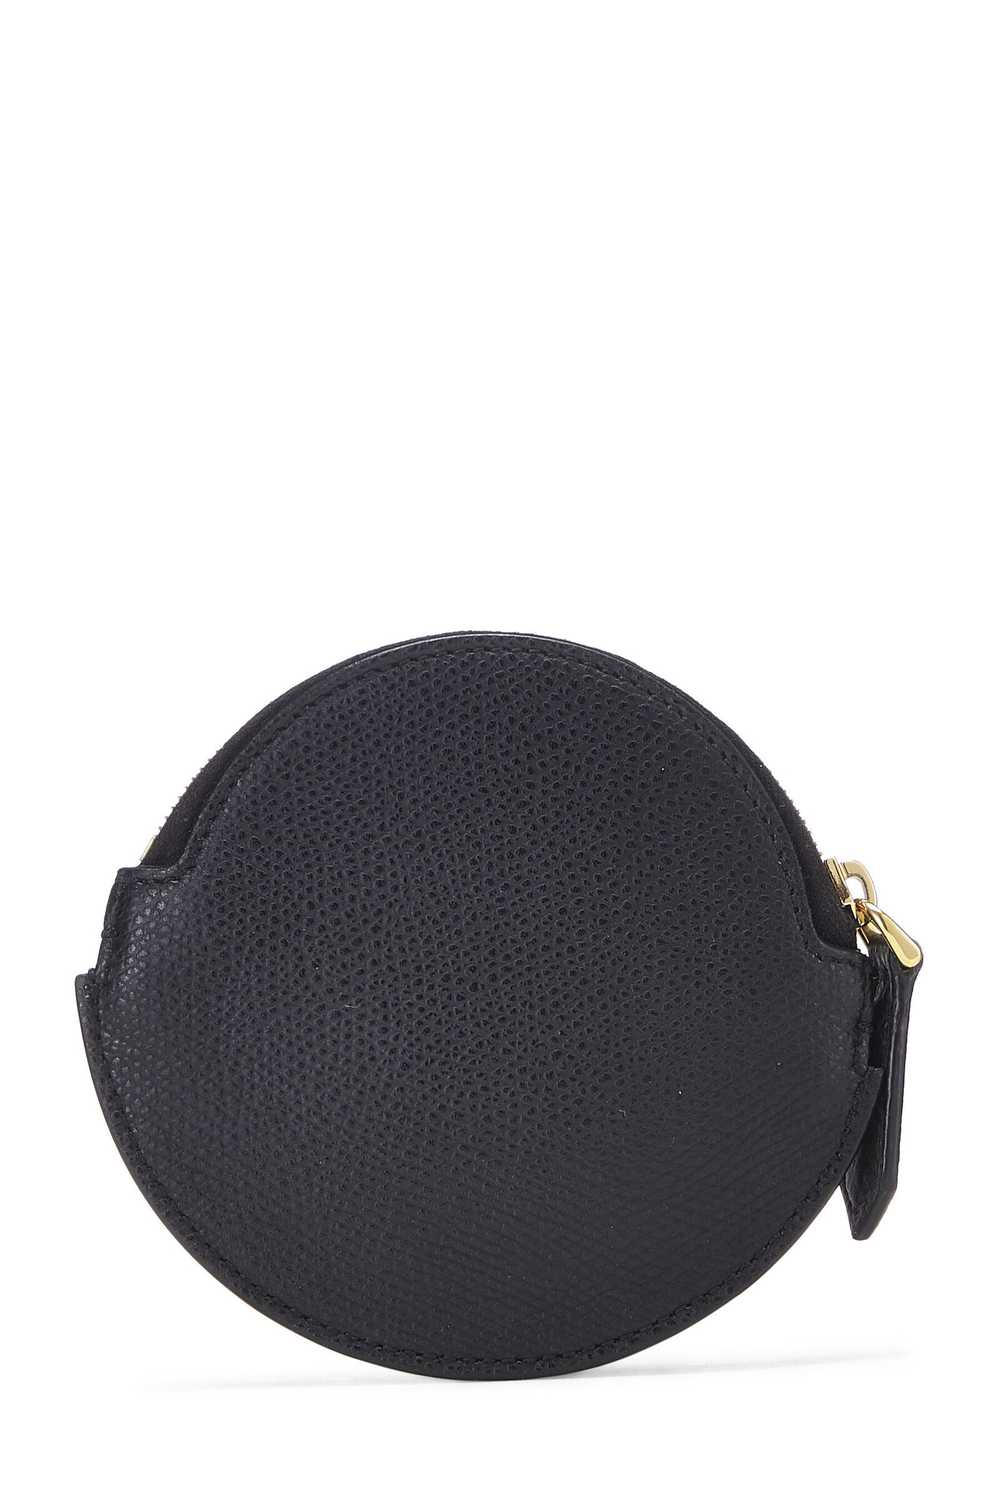 Black Leather Round Coin Purse - image 3